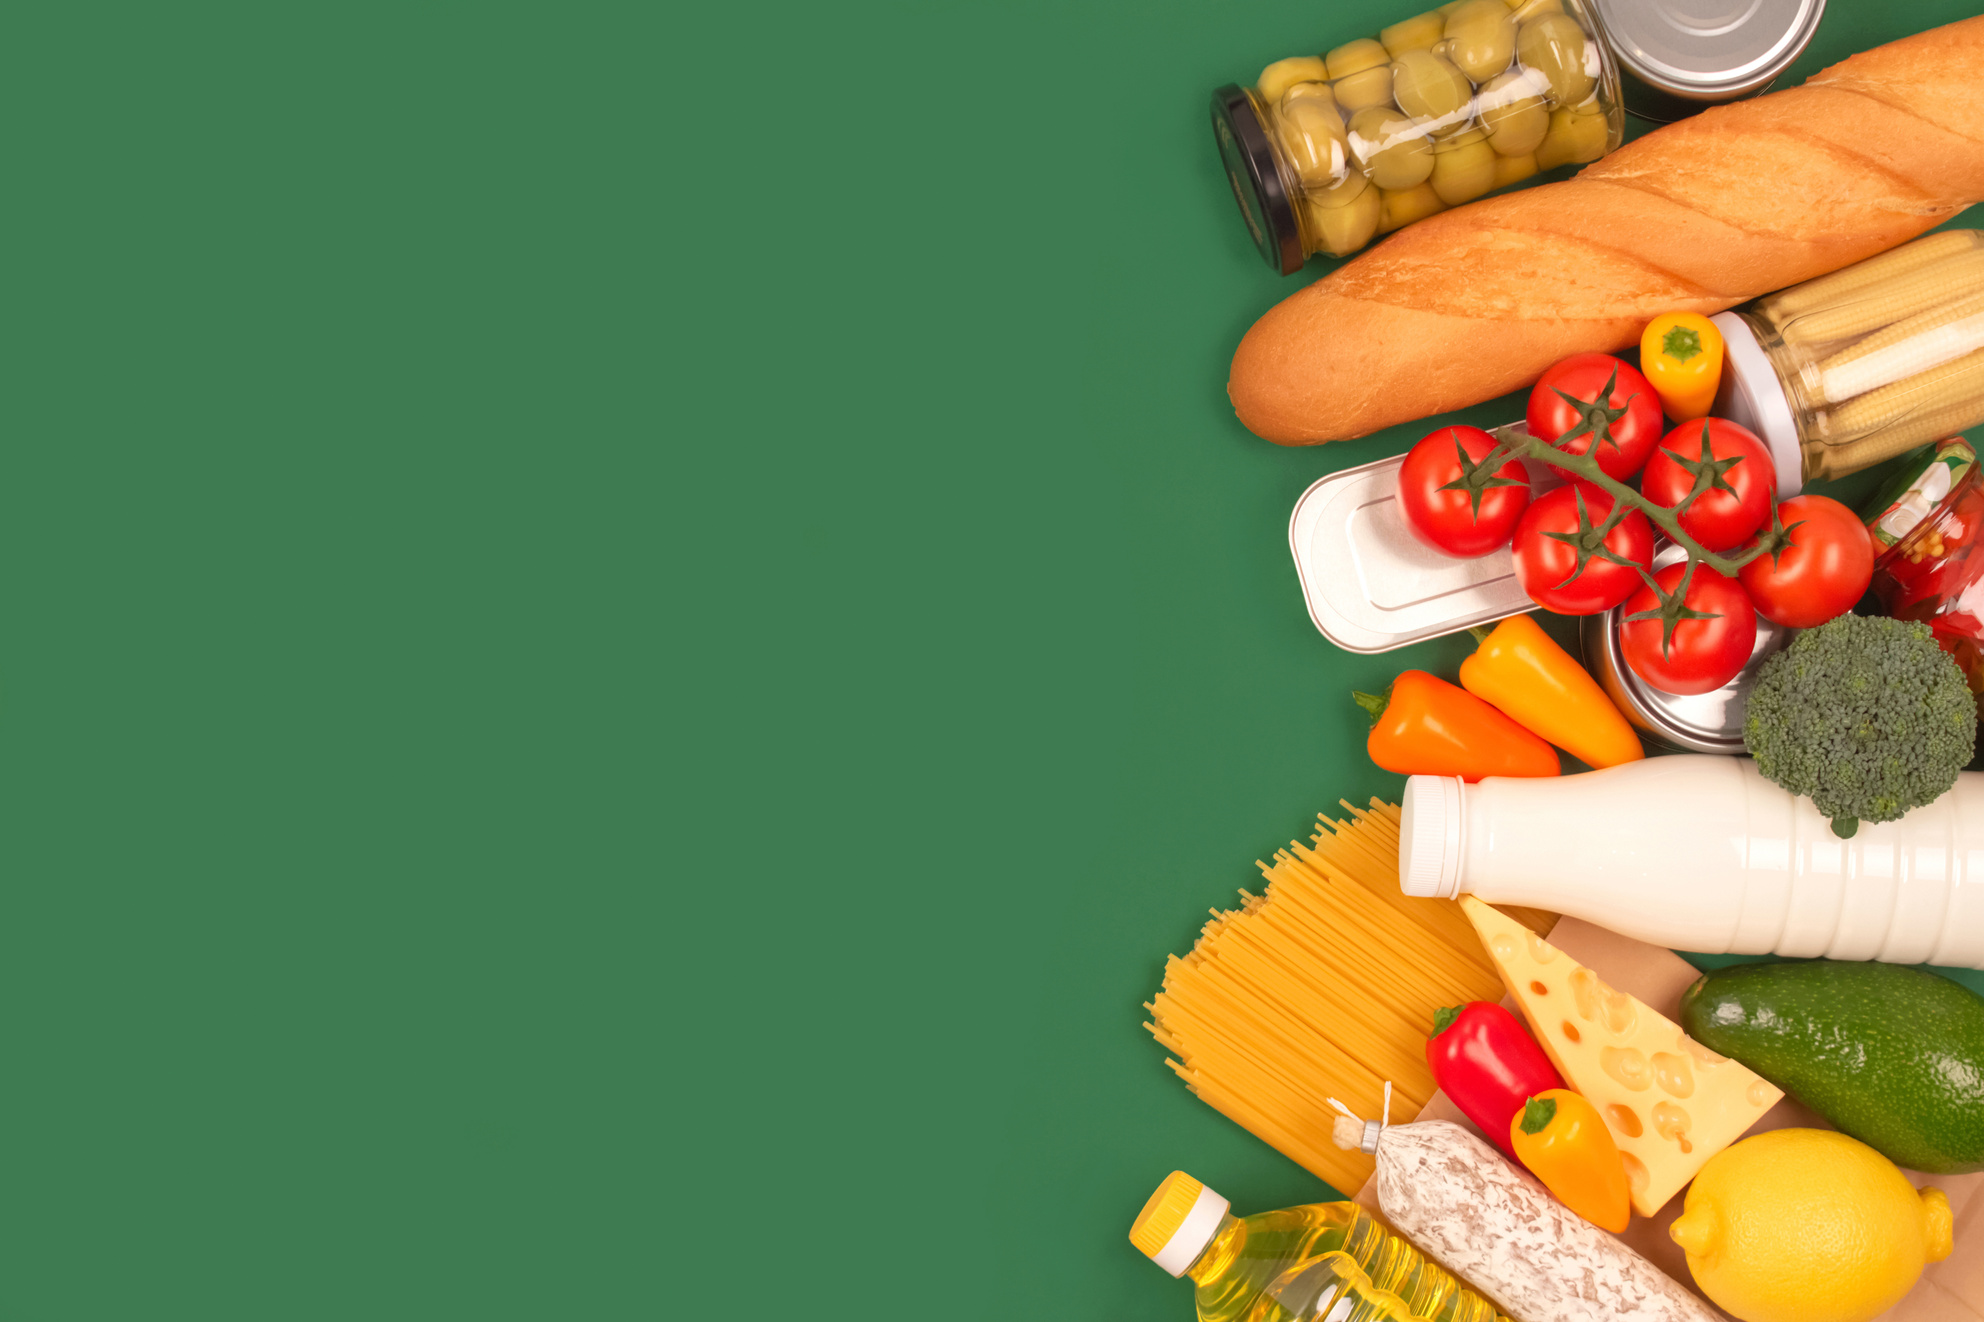 Different groceries, food donations on green background with copyspace - pasta, fresh vegatables, canned food, baguette, cooking oil, tomatoes, cheese. Food donations, food bank, food delivery concept